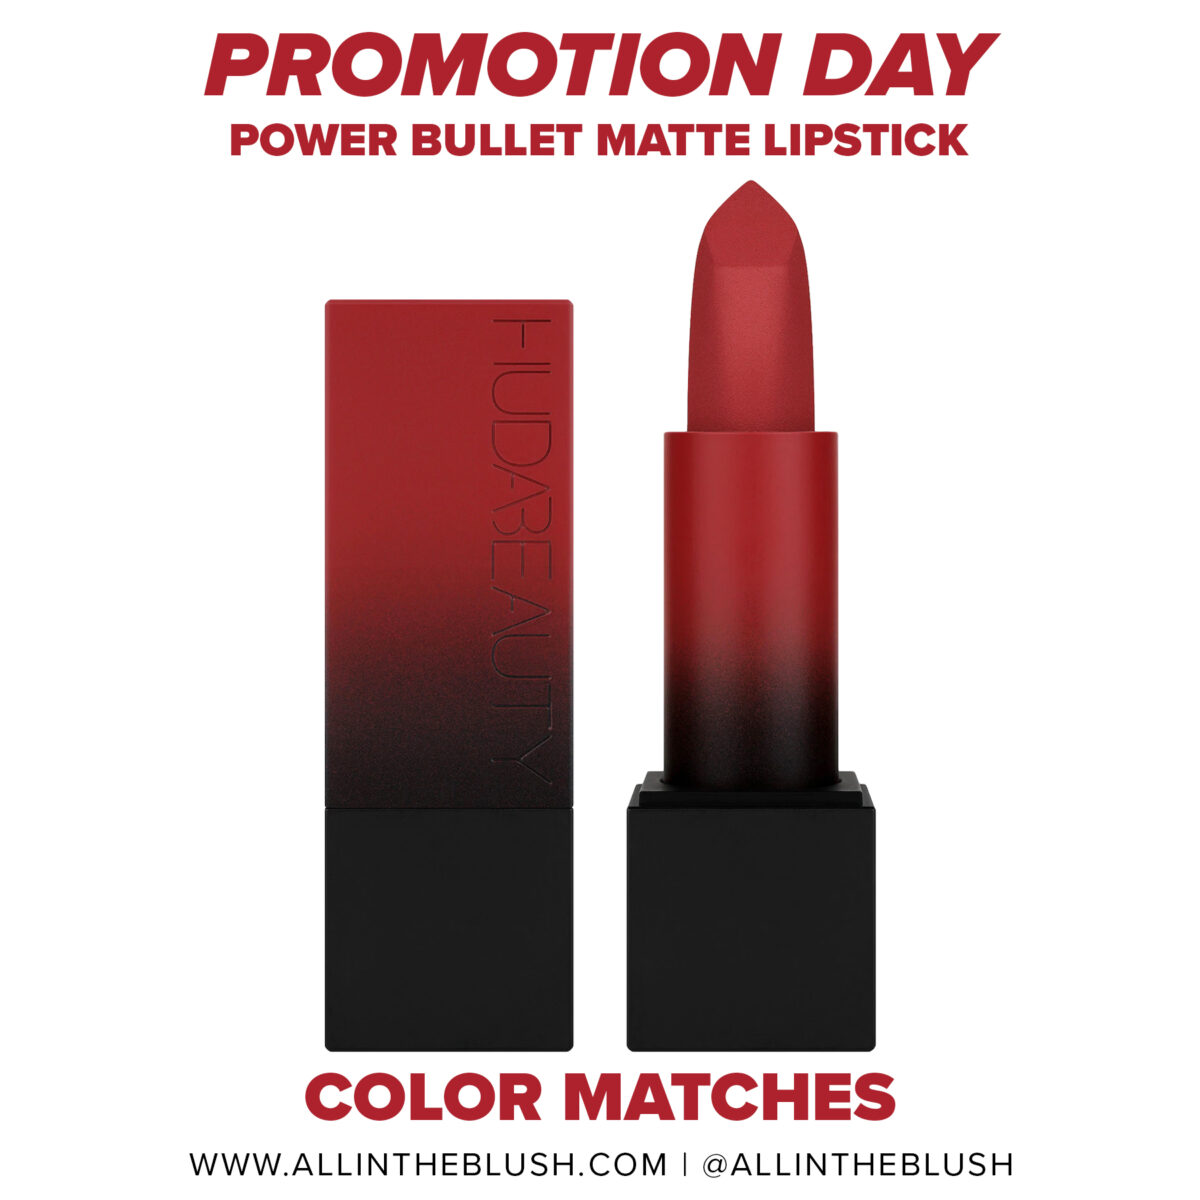 Huda Beauty Promotion Day Power Bullet Matte Lipstick Color Matches